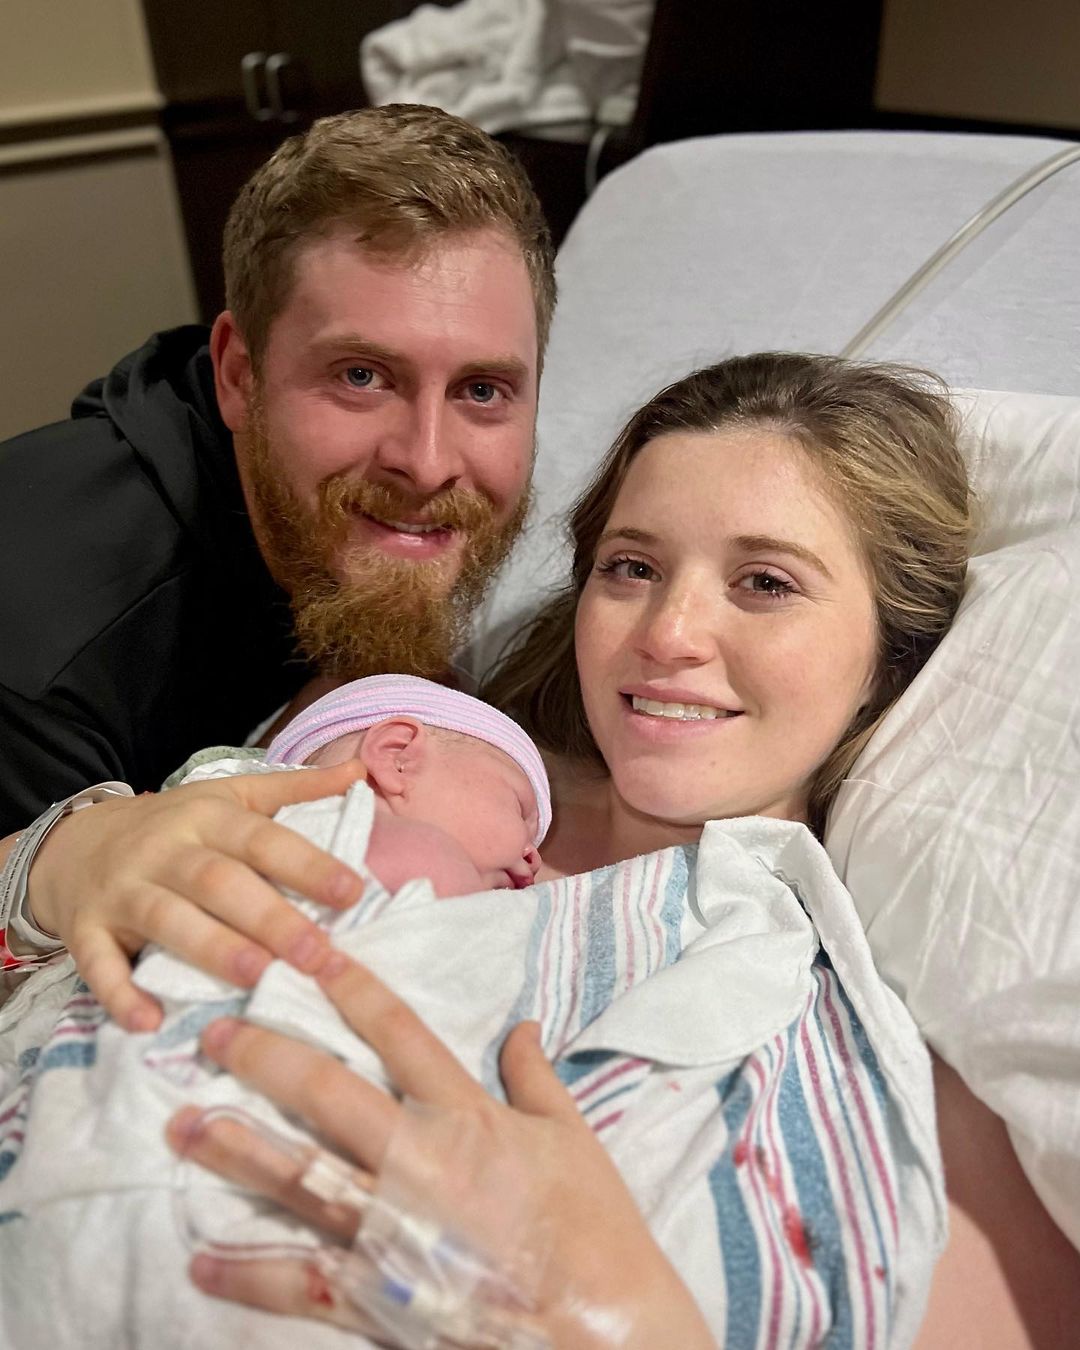 Joy-Anna and Austin welcomed their third child, Gunner, in May of last year